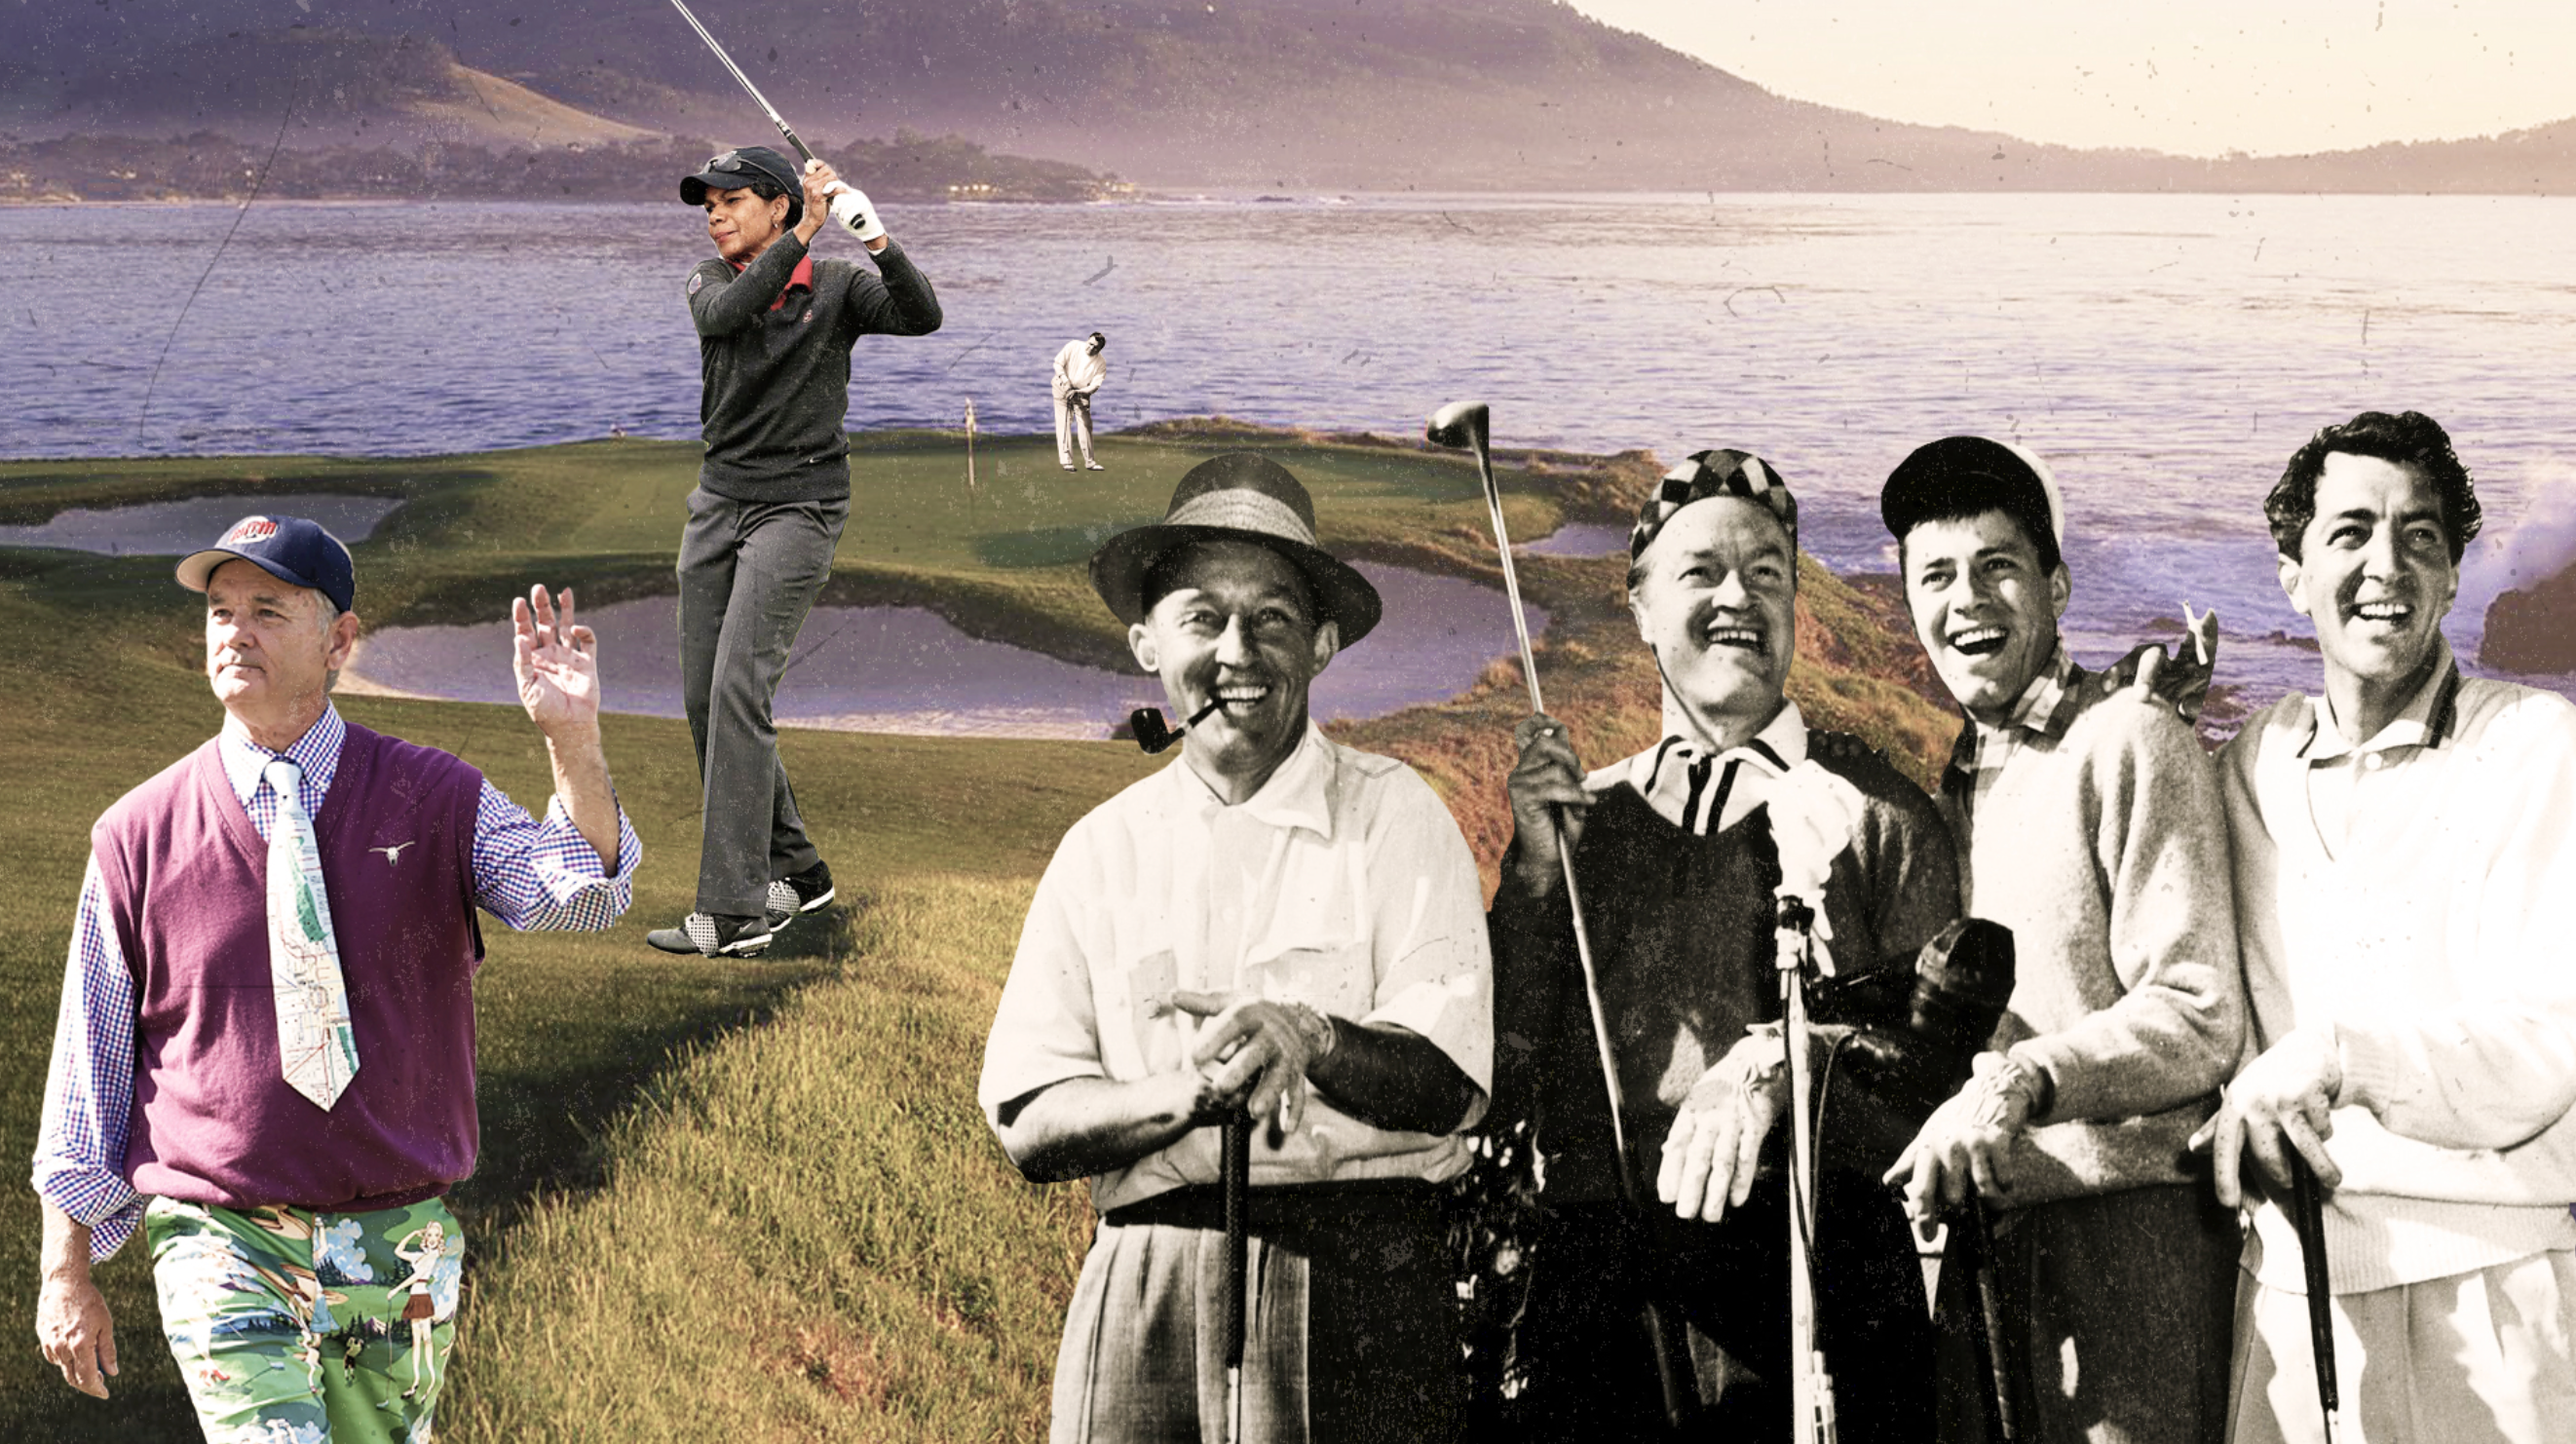 Famous Last Words: The Life and Death of the Entertainer Behind The Pebble Beach Pro-Am